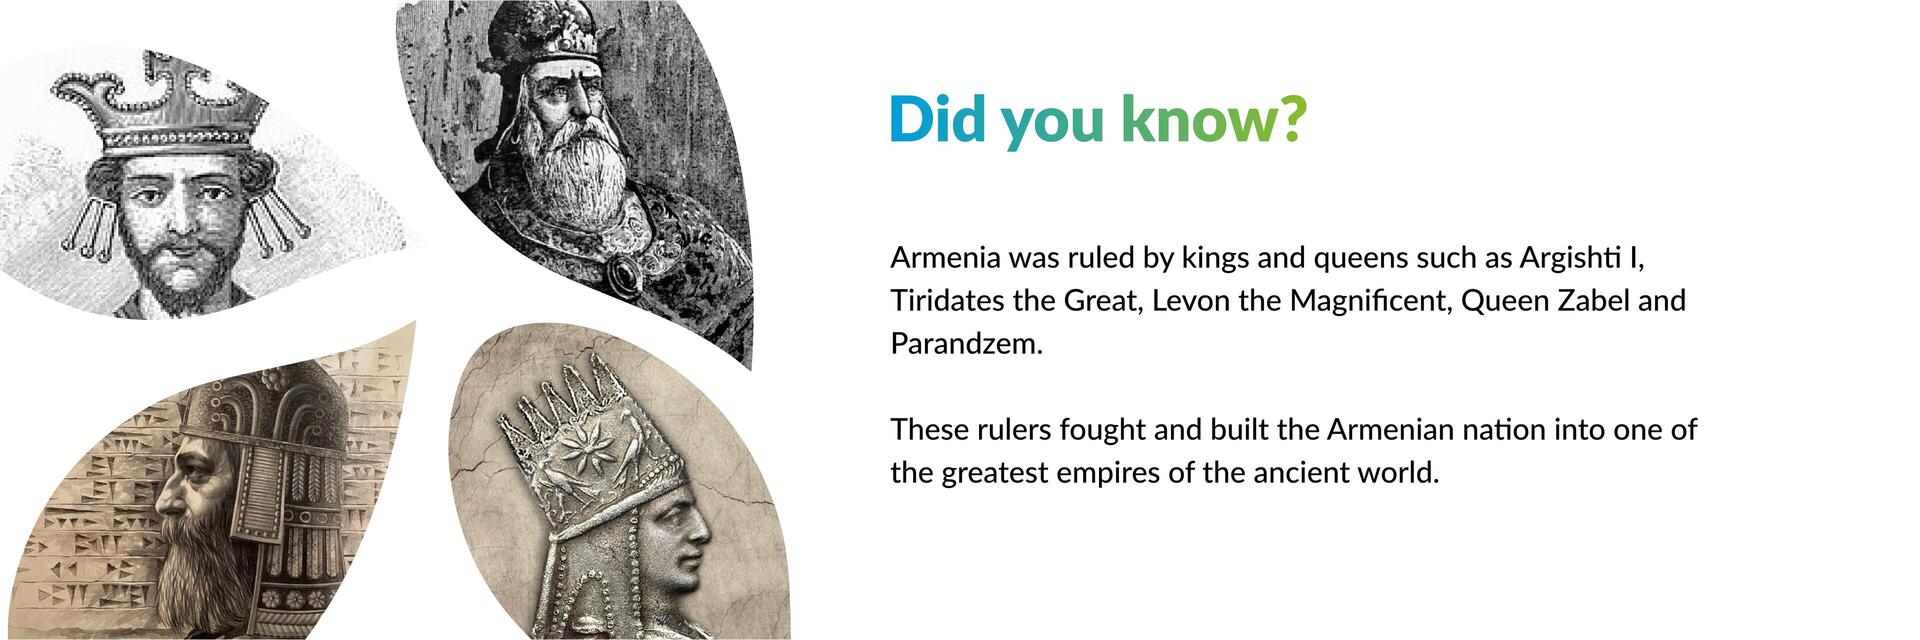 Armenia was ruled by kings and queens such as Tiridates I and Isabella. 